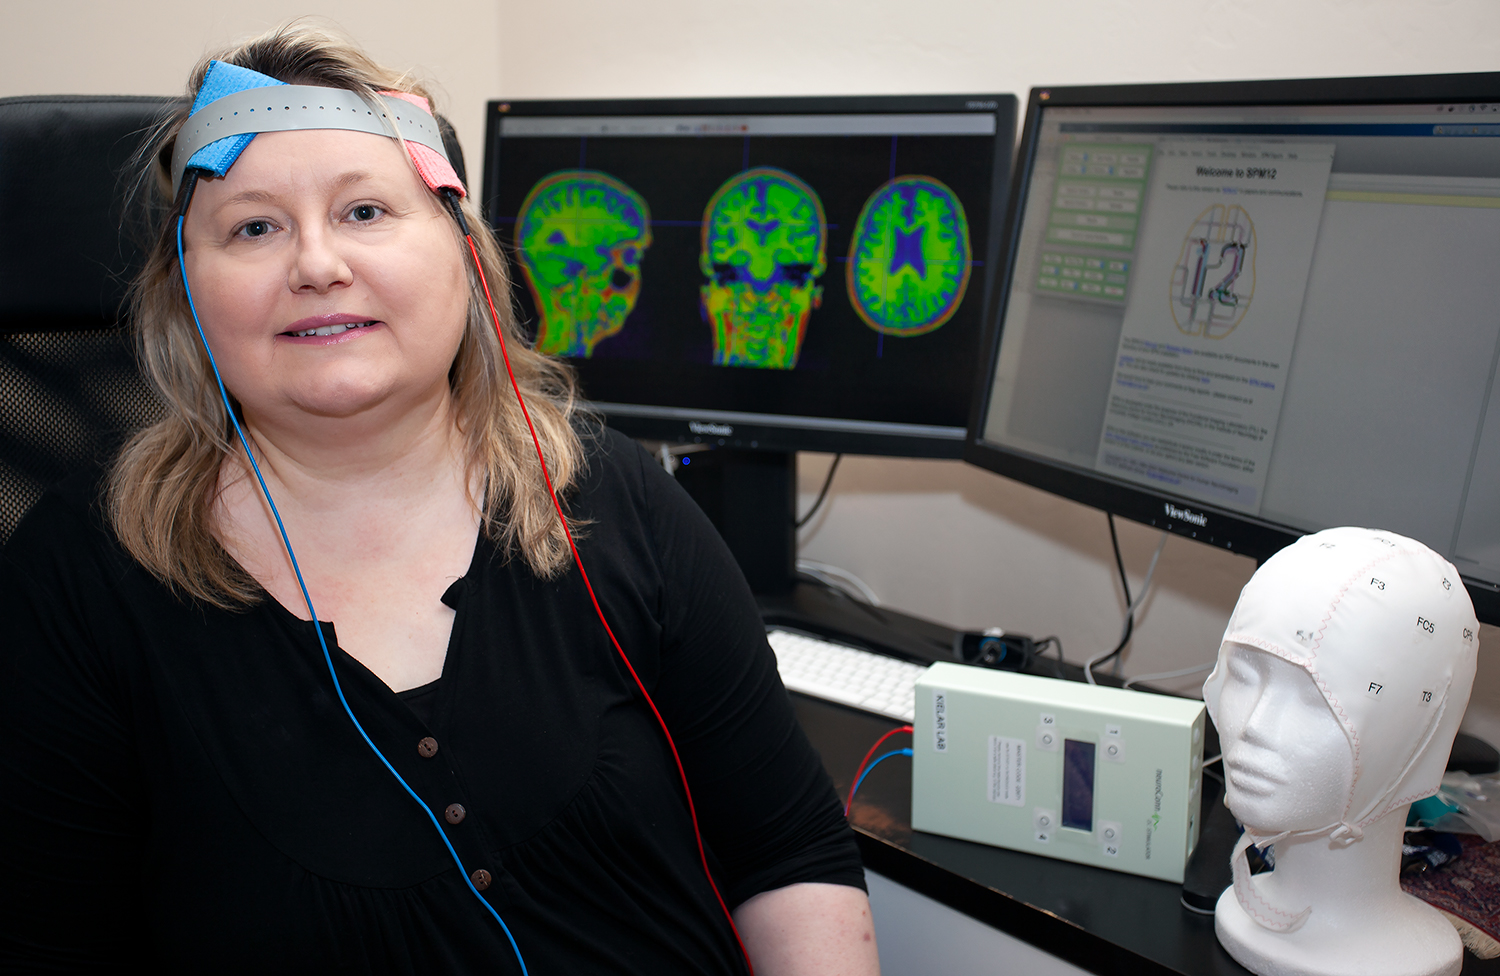 Aneta Kielar with tDCS on and brain images in background